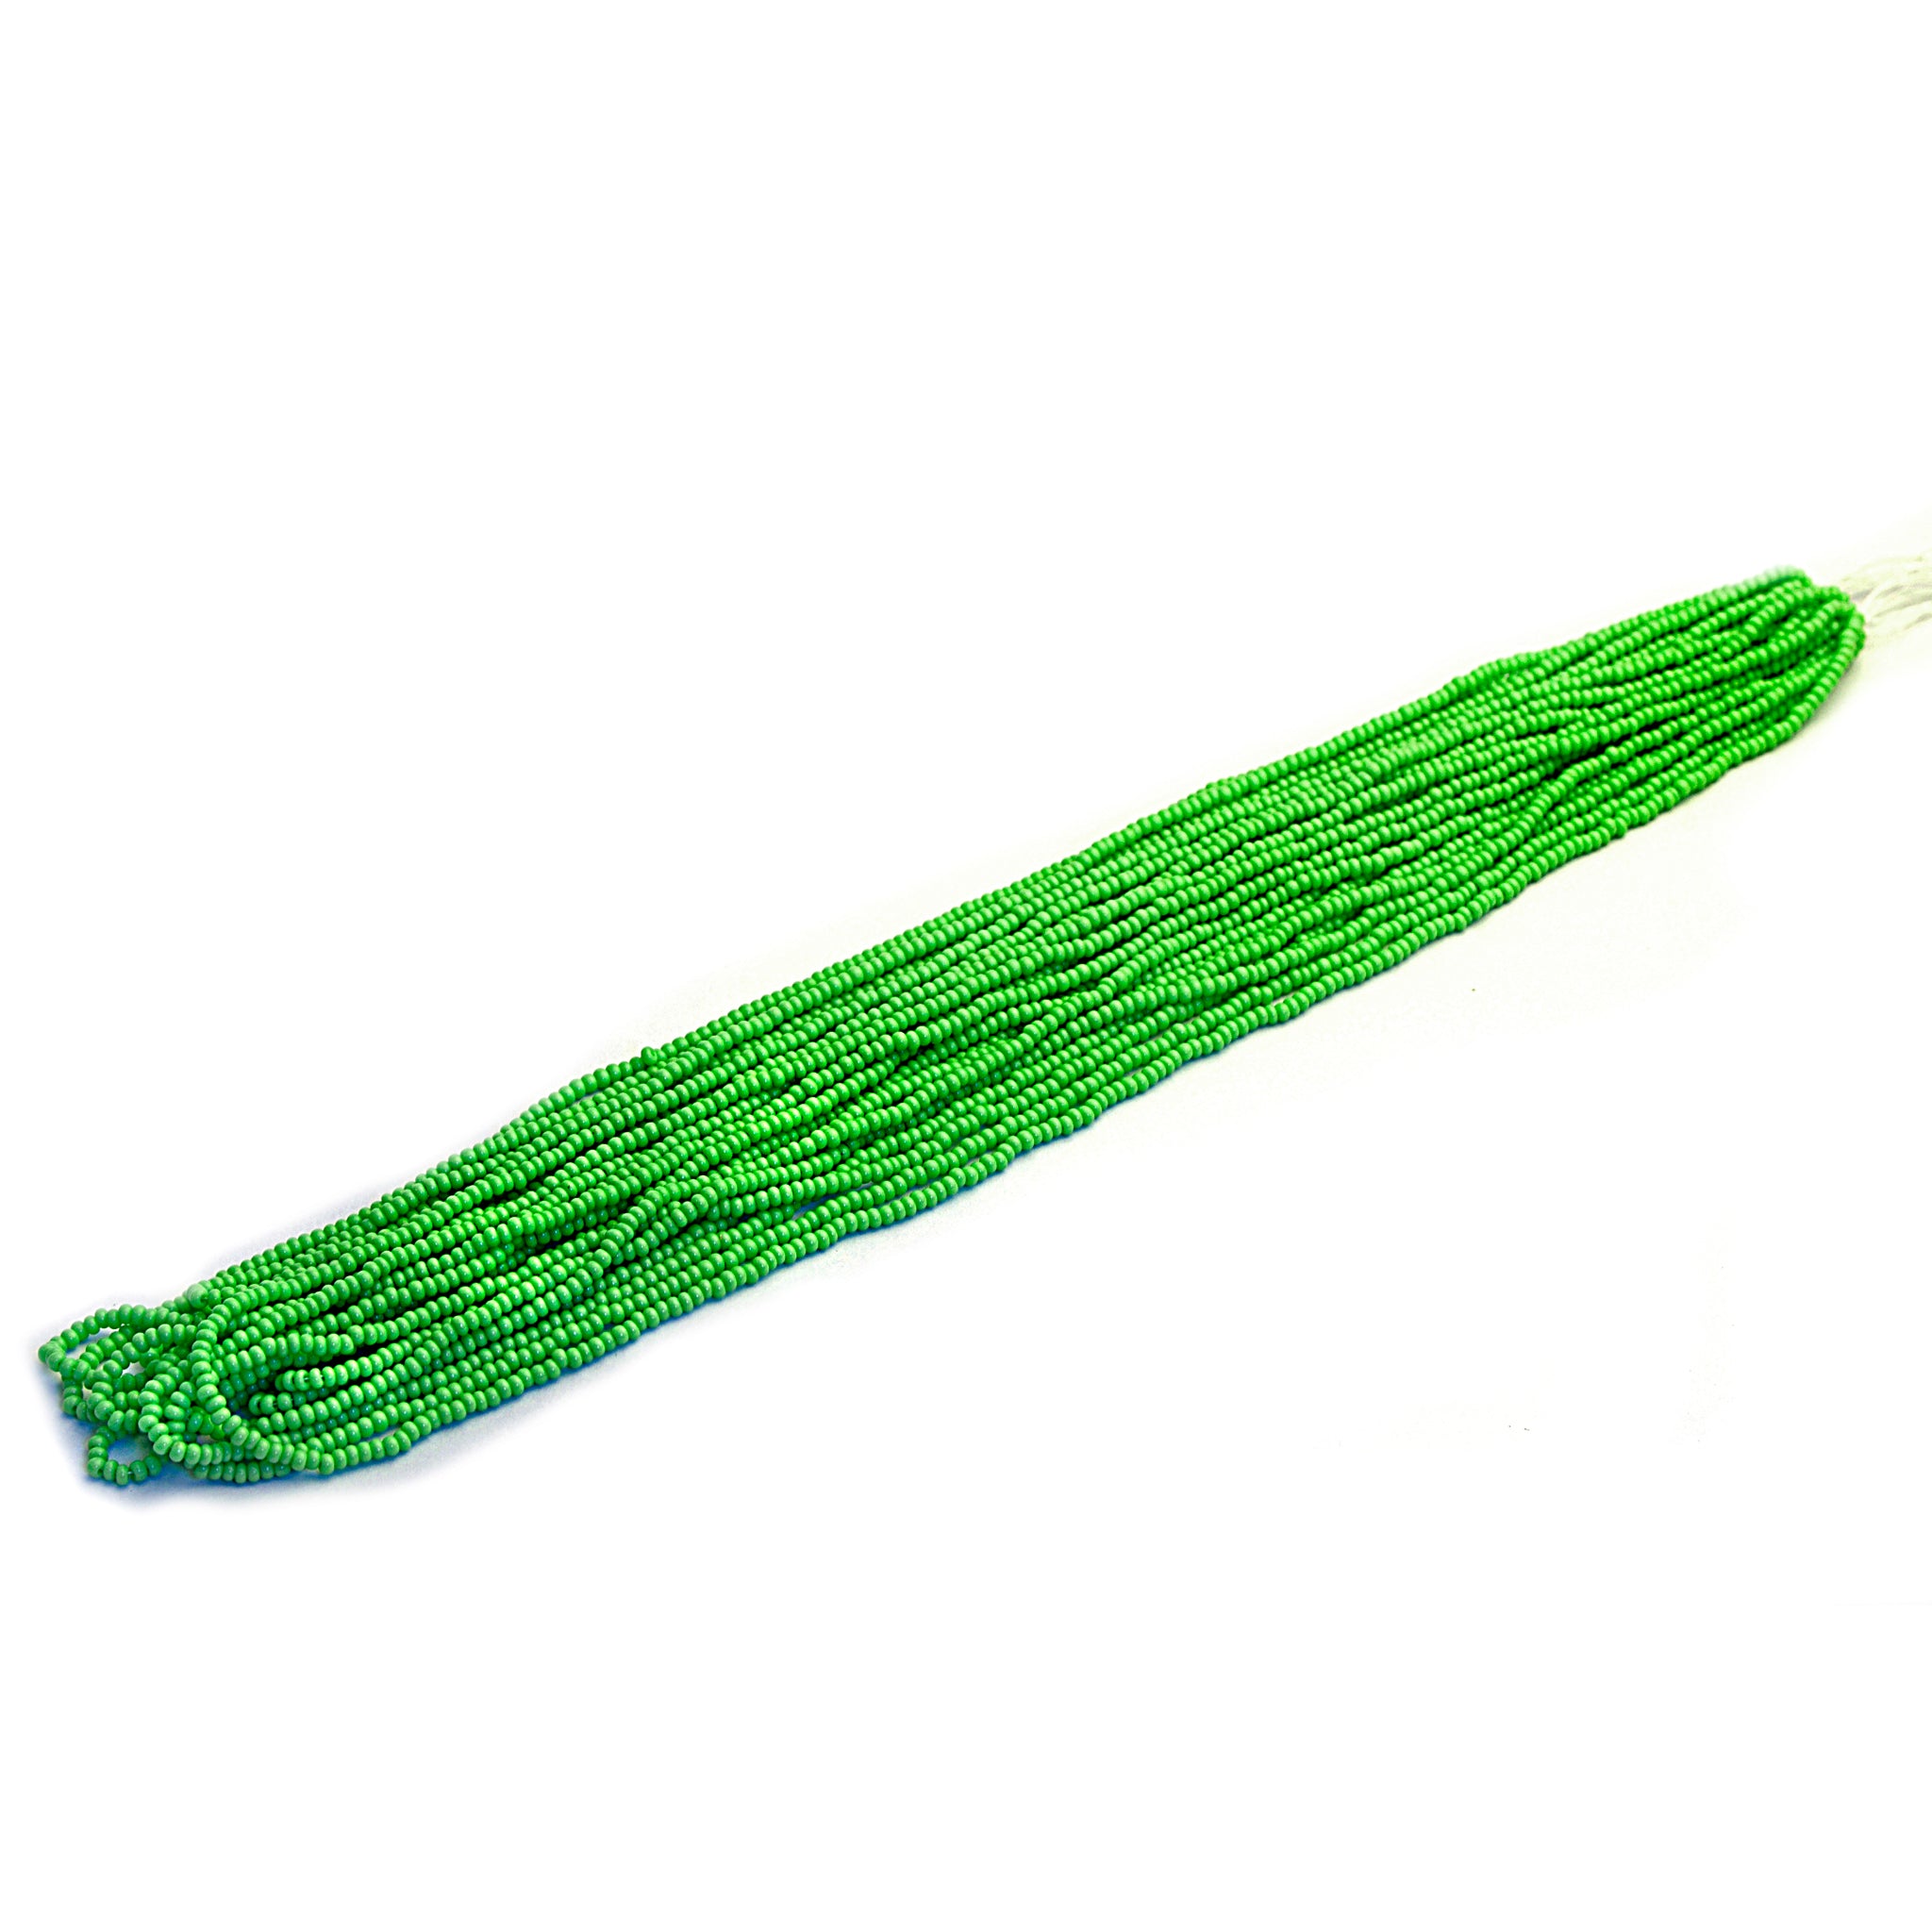 Light Green Opaque Czech Seed Beads from Identity Leathercraft